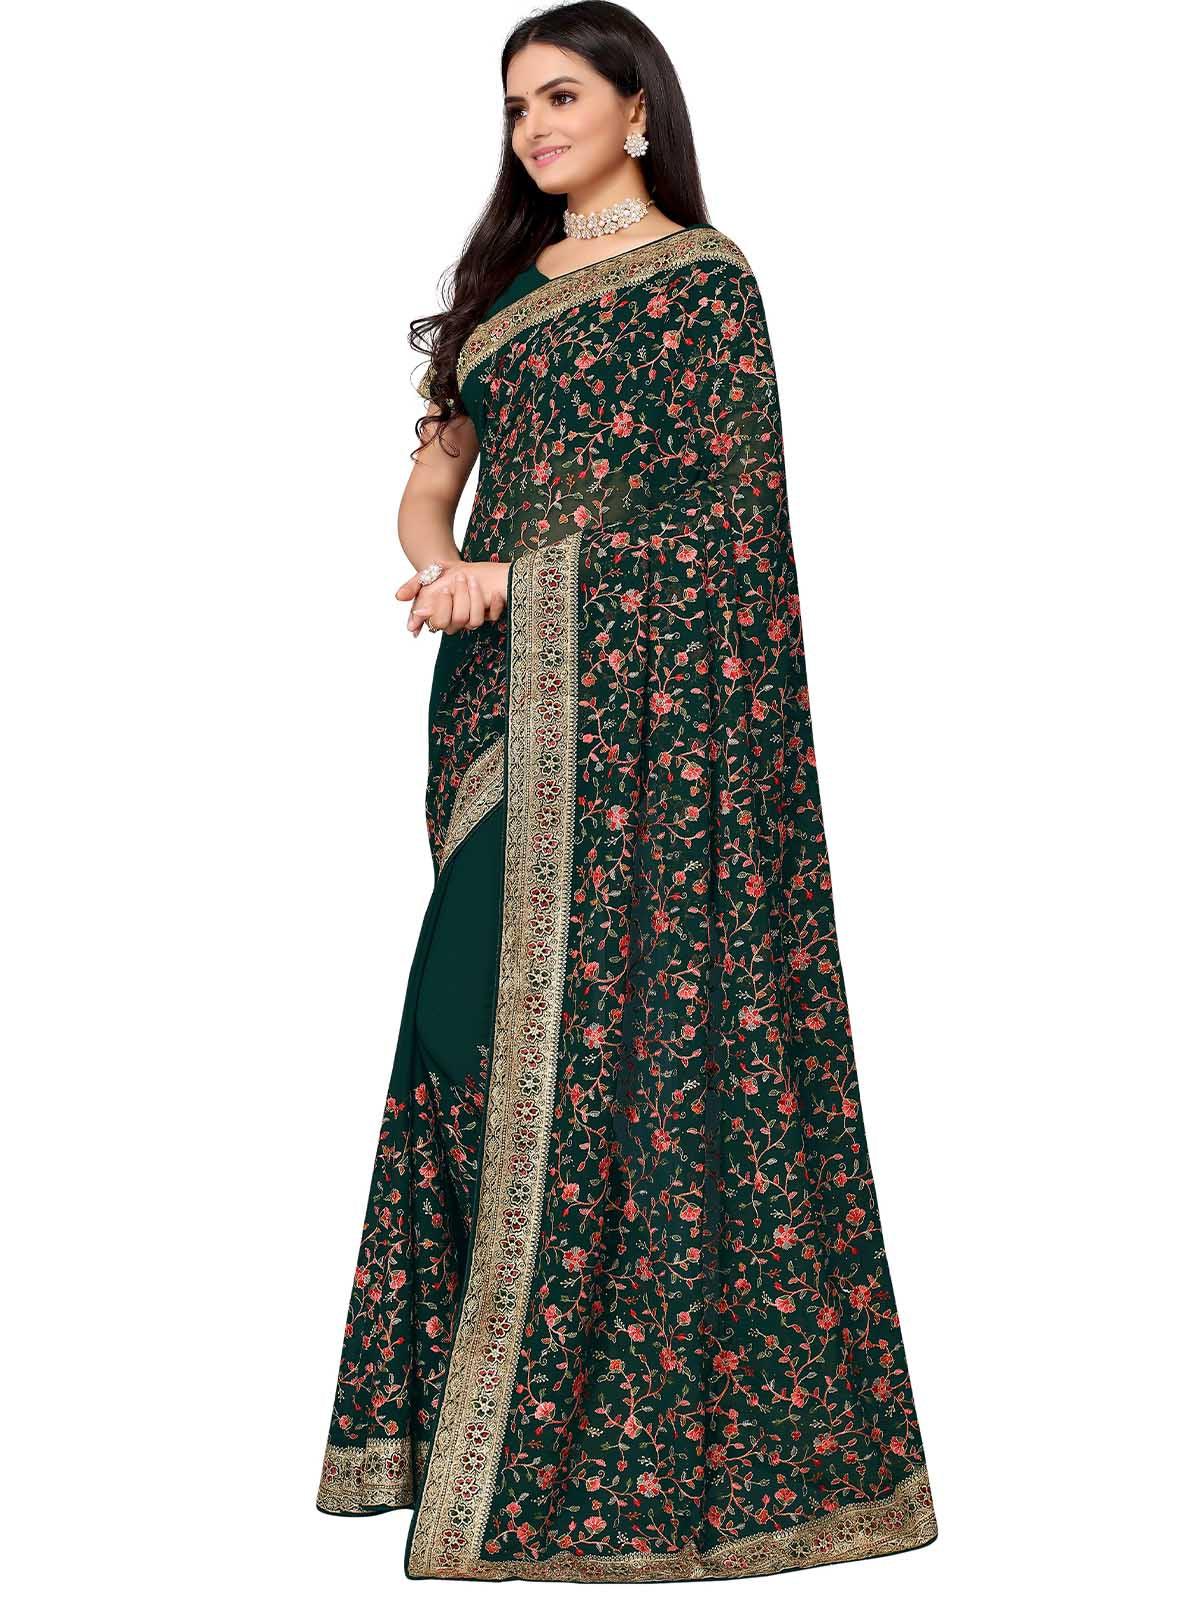 Women's Green Poly Georgette Embroidered Saree With Blouse - Odette